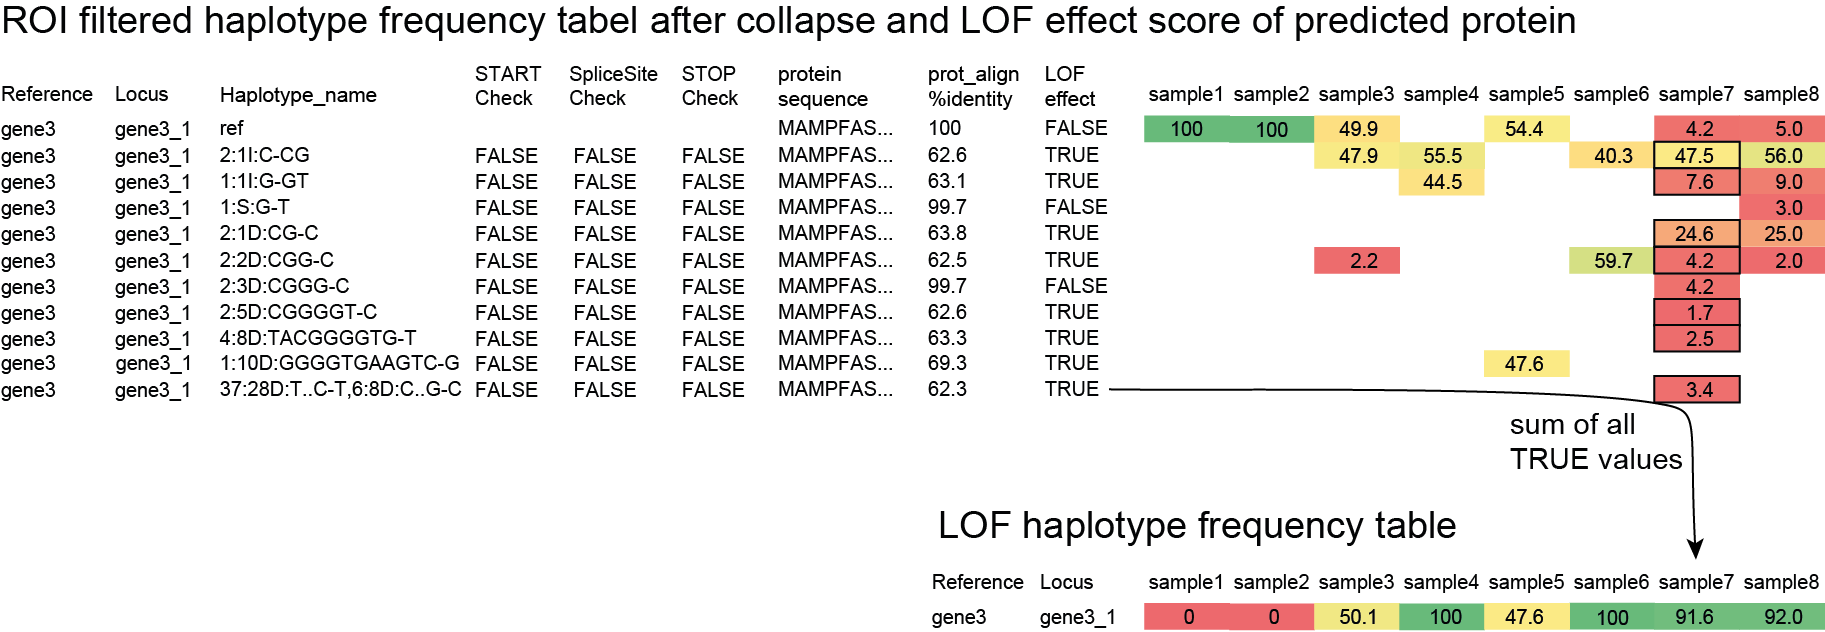 ../_images/haplotype_LOF_frequency_table.png